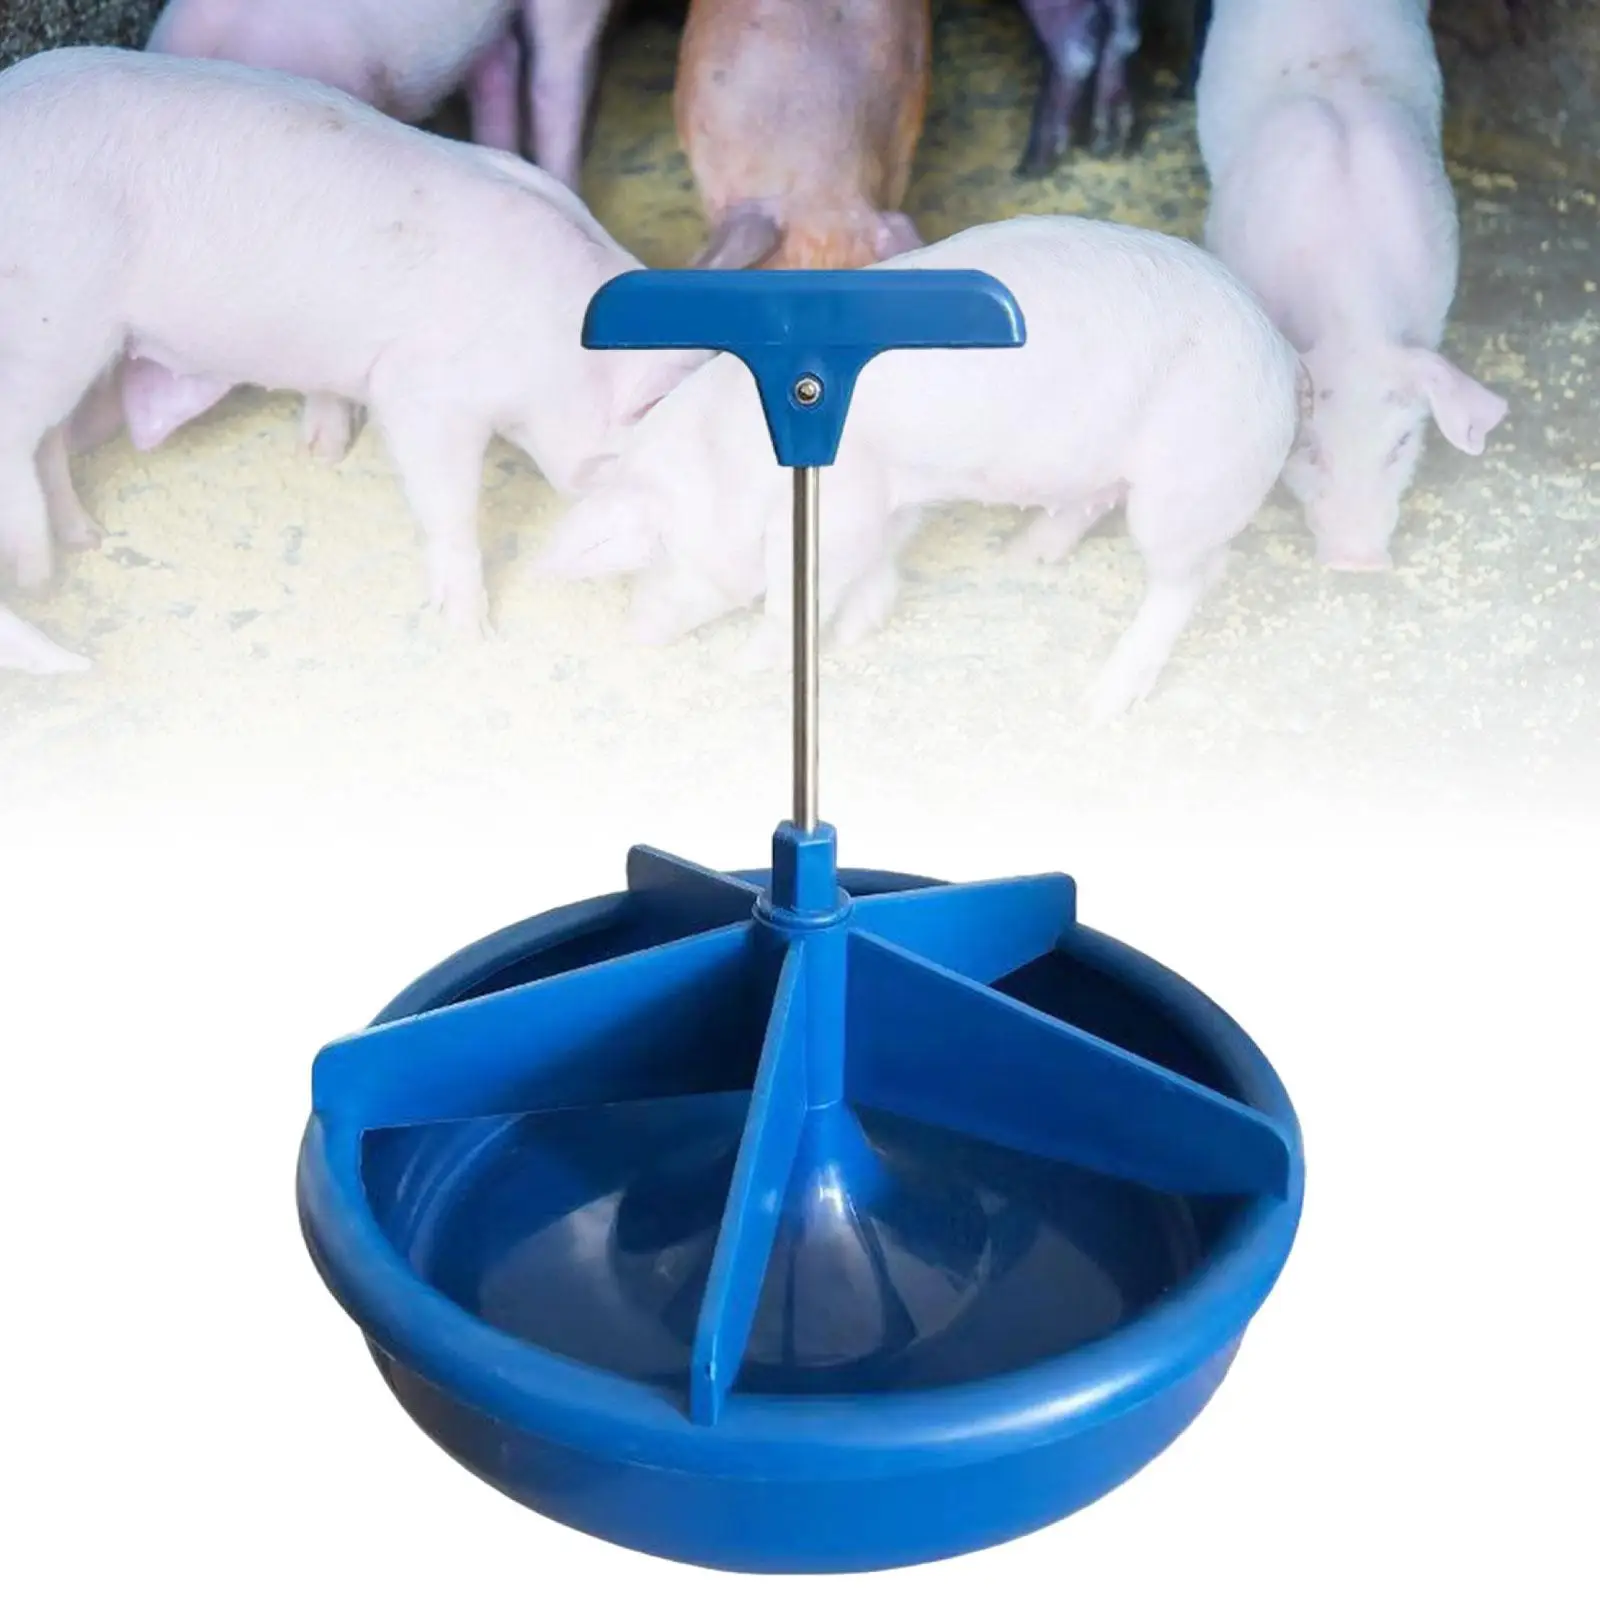 Pig Food Trough Basin Container Mountable Dishes Pig Feeder Bowl Food Tray for Animal pet Poultry Animal Husbandry Equipment